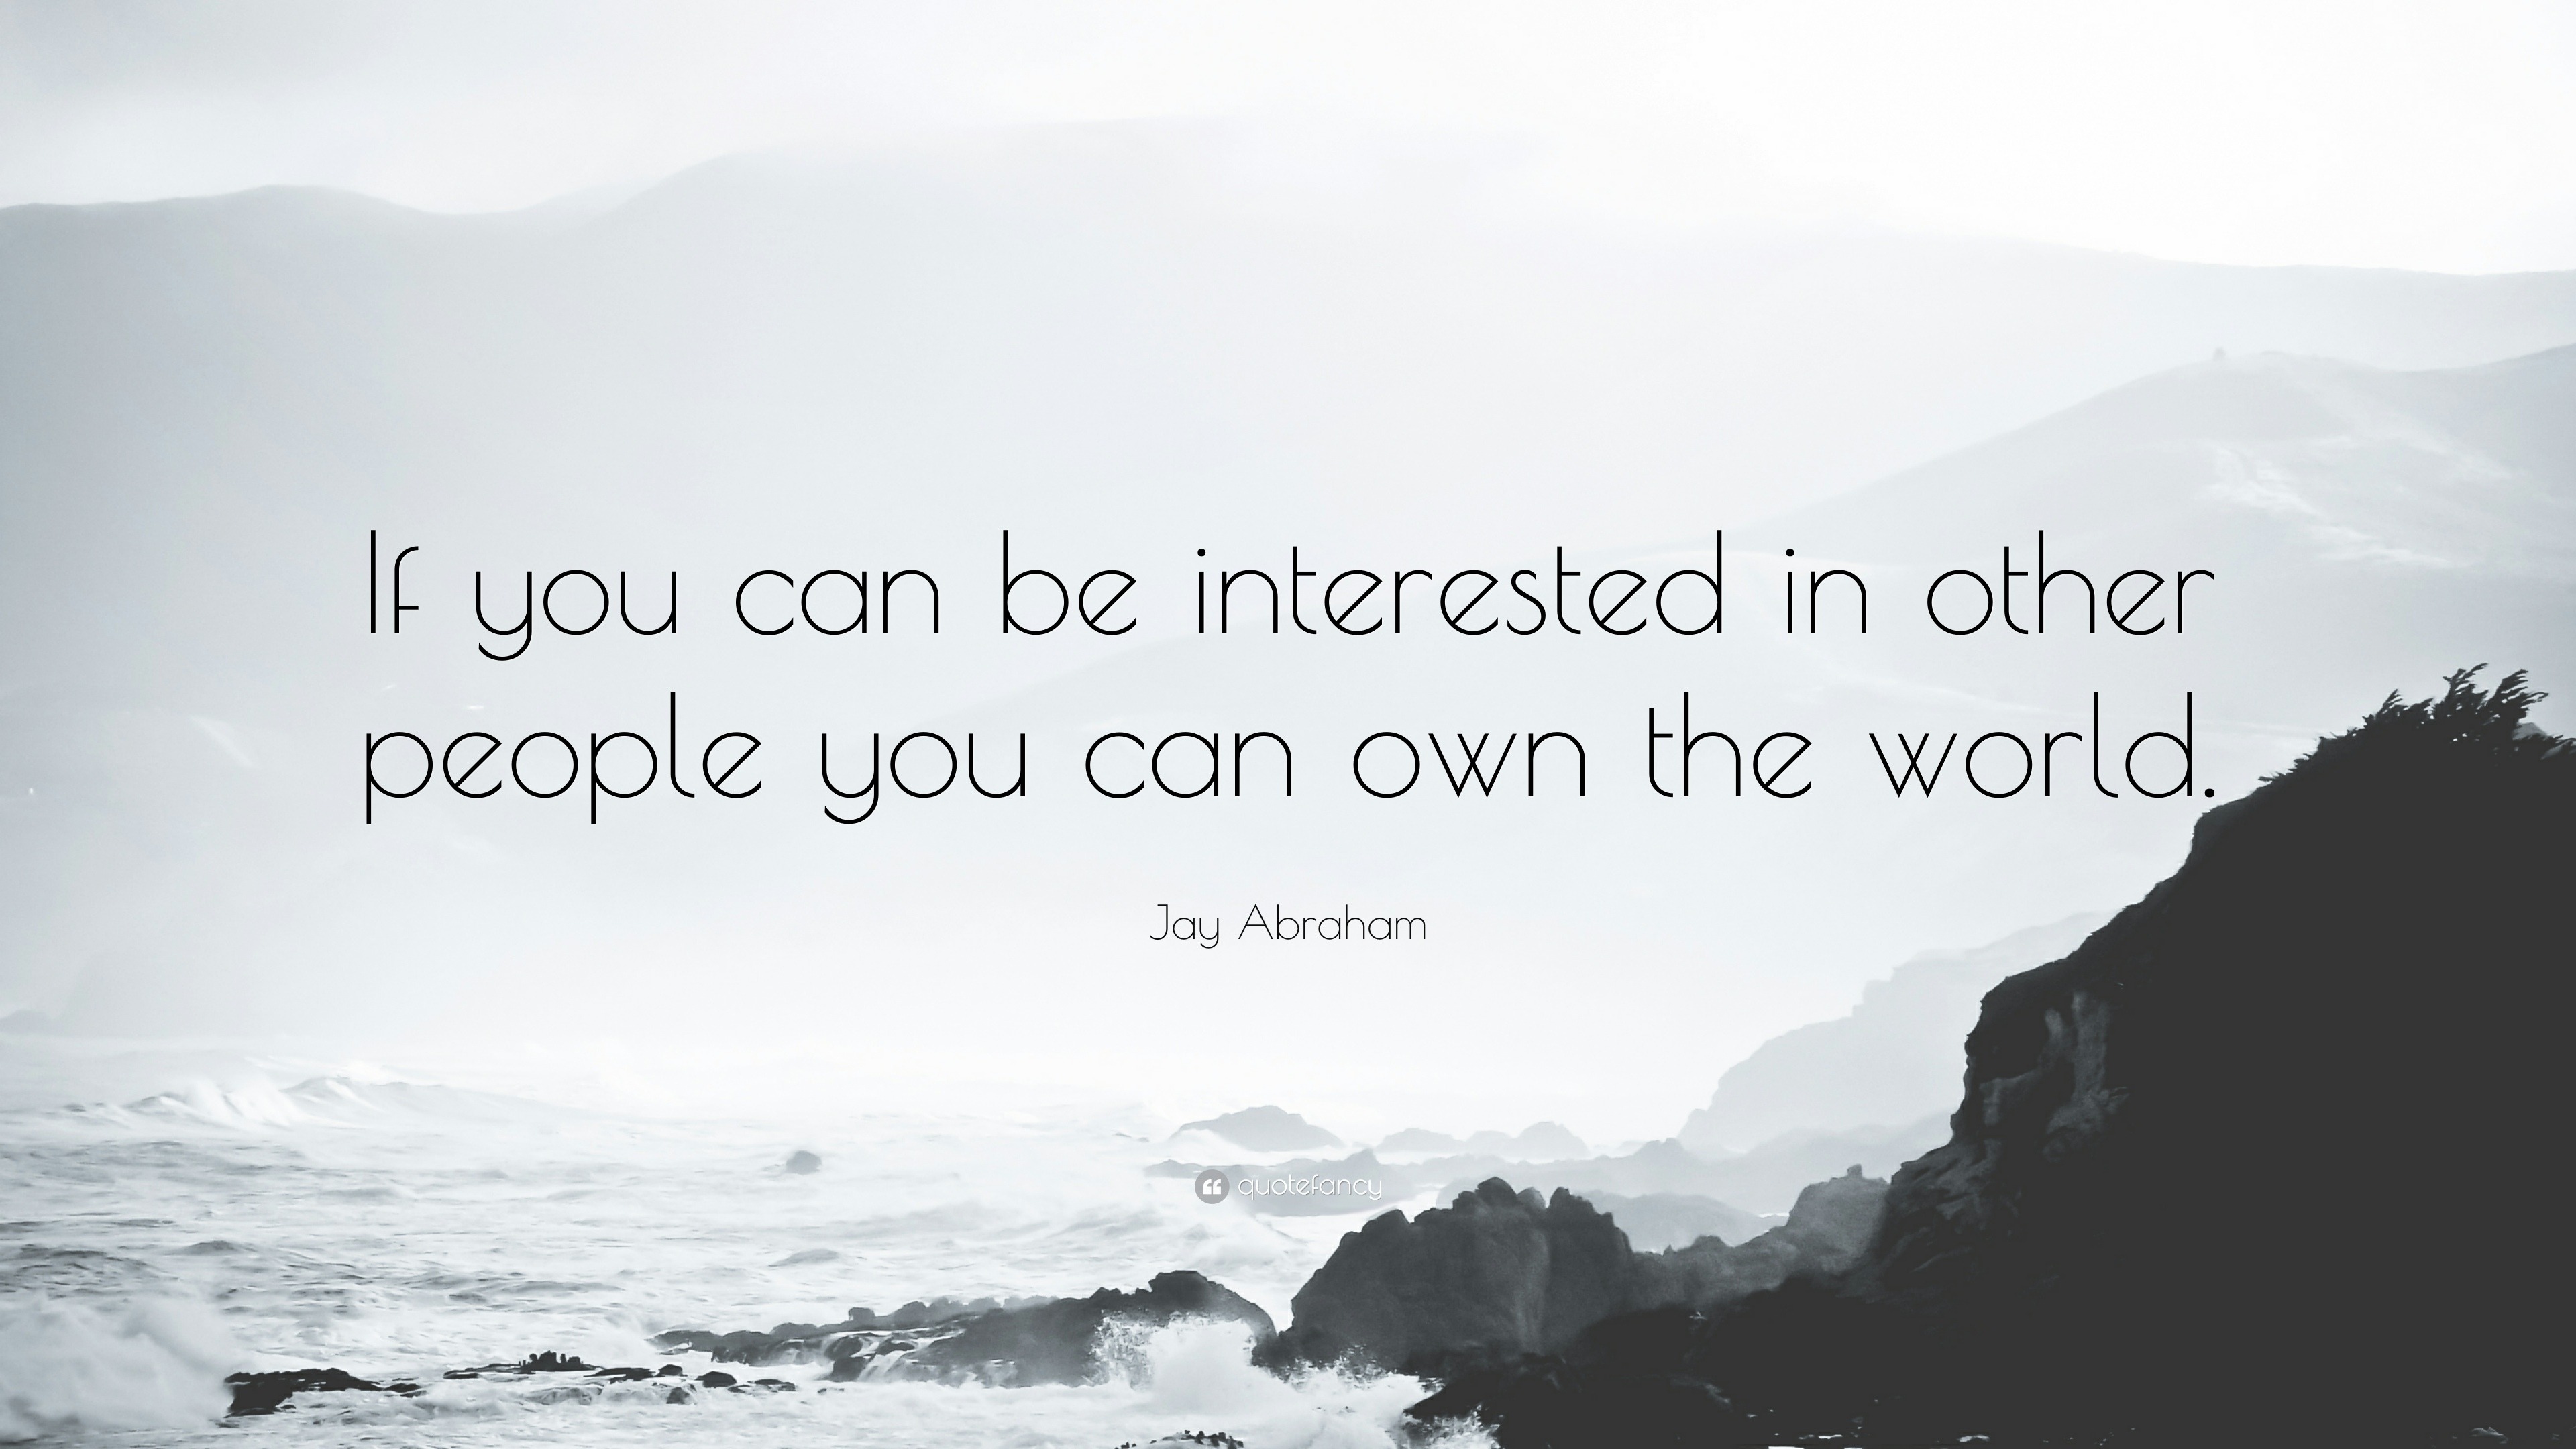 jay abraham quotes